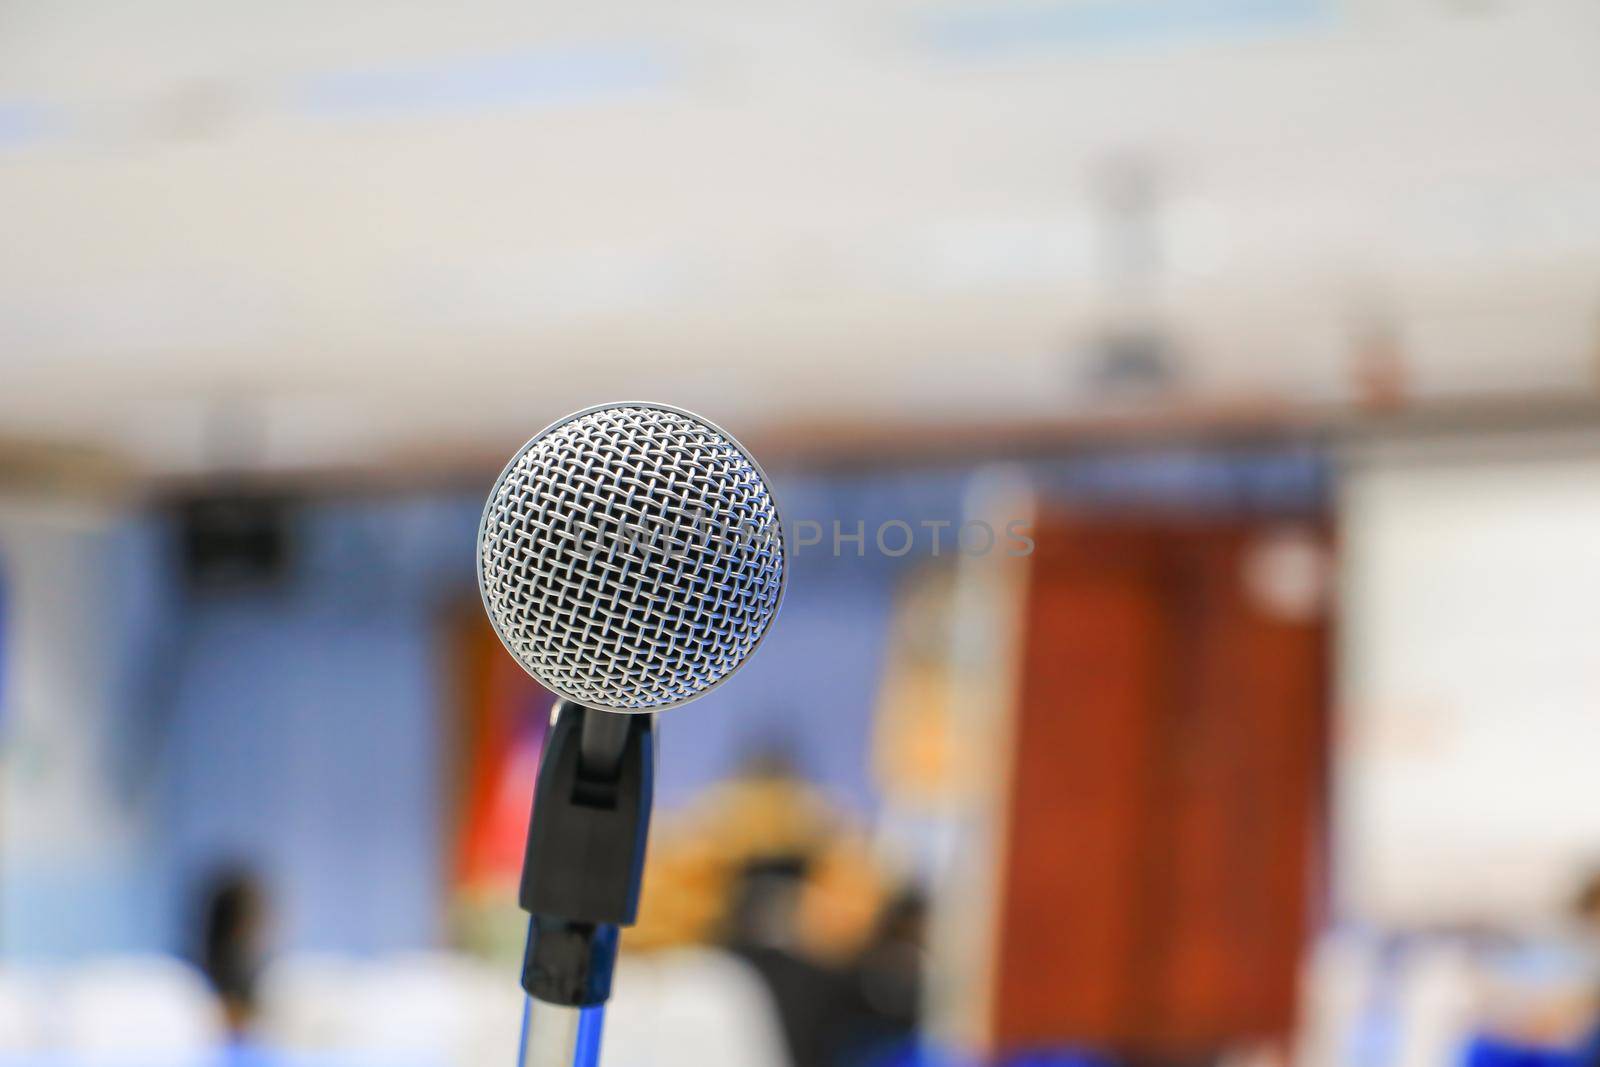 microphone wireless in a meeting room seminar conference background: Select focus with shallow depth of field. by pramot